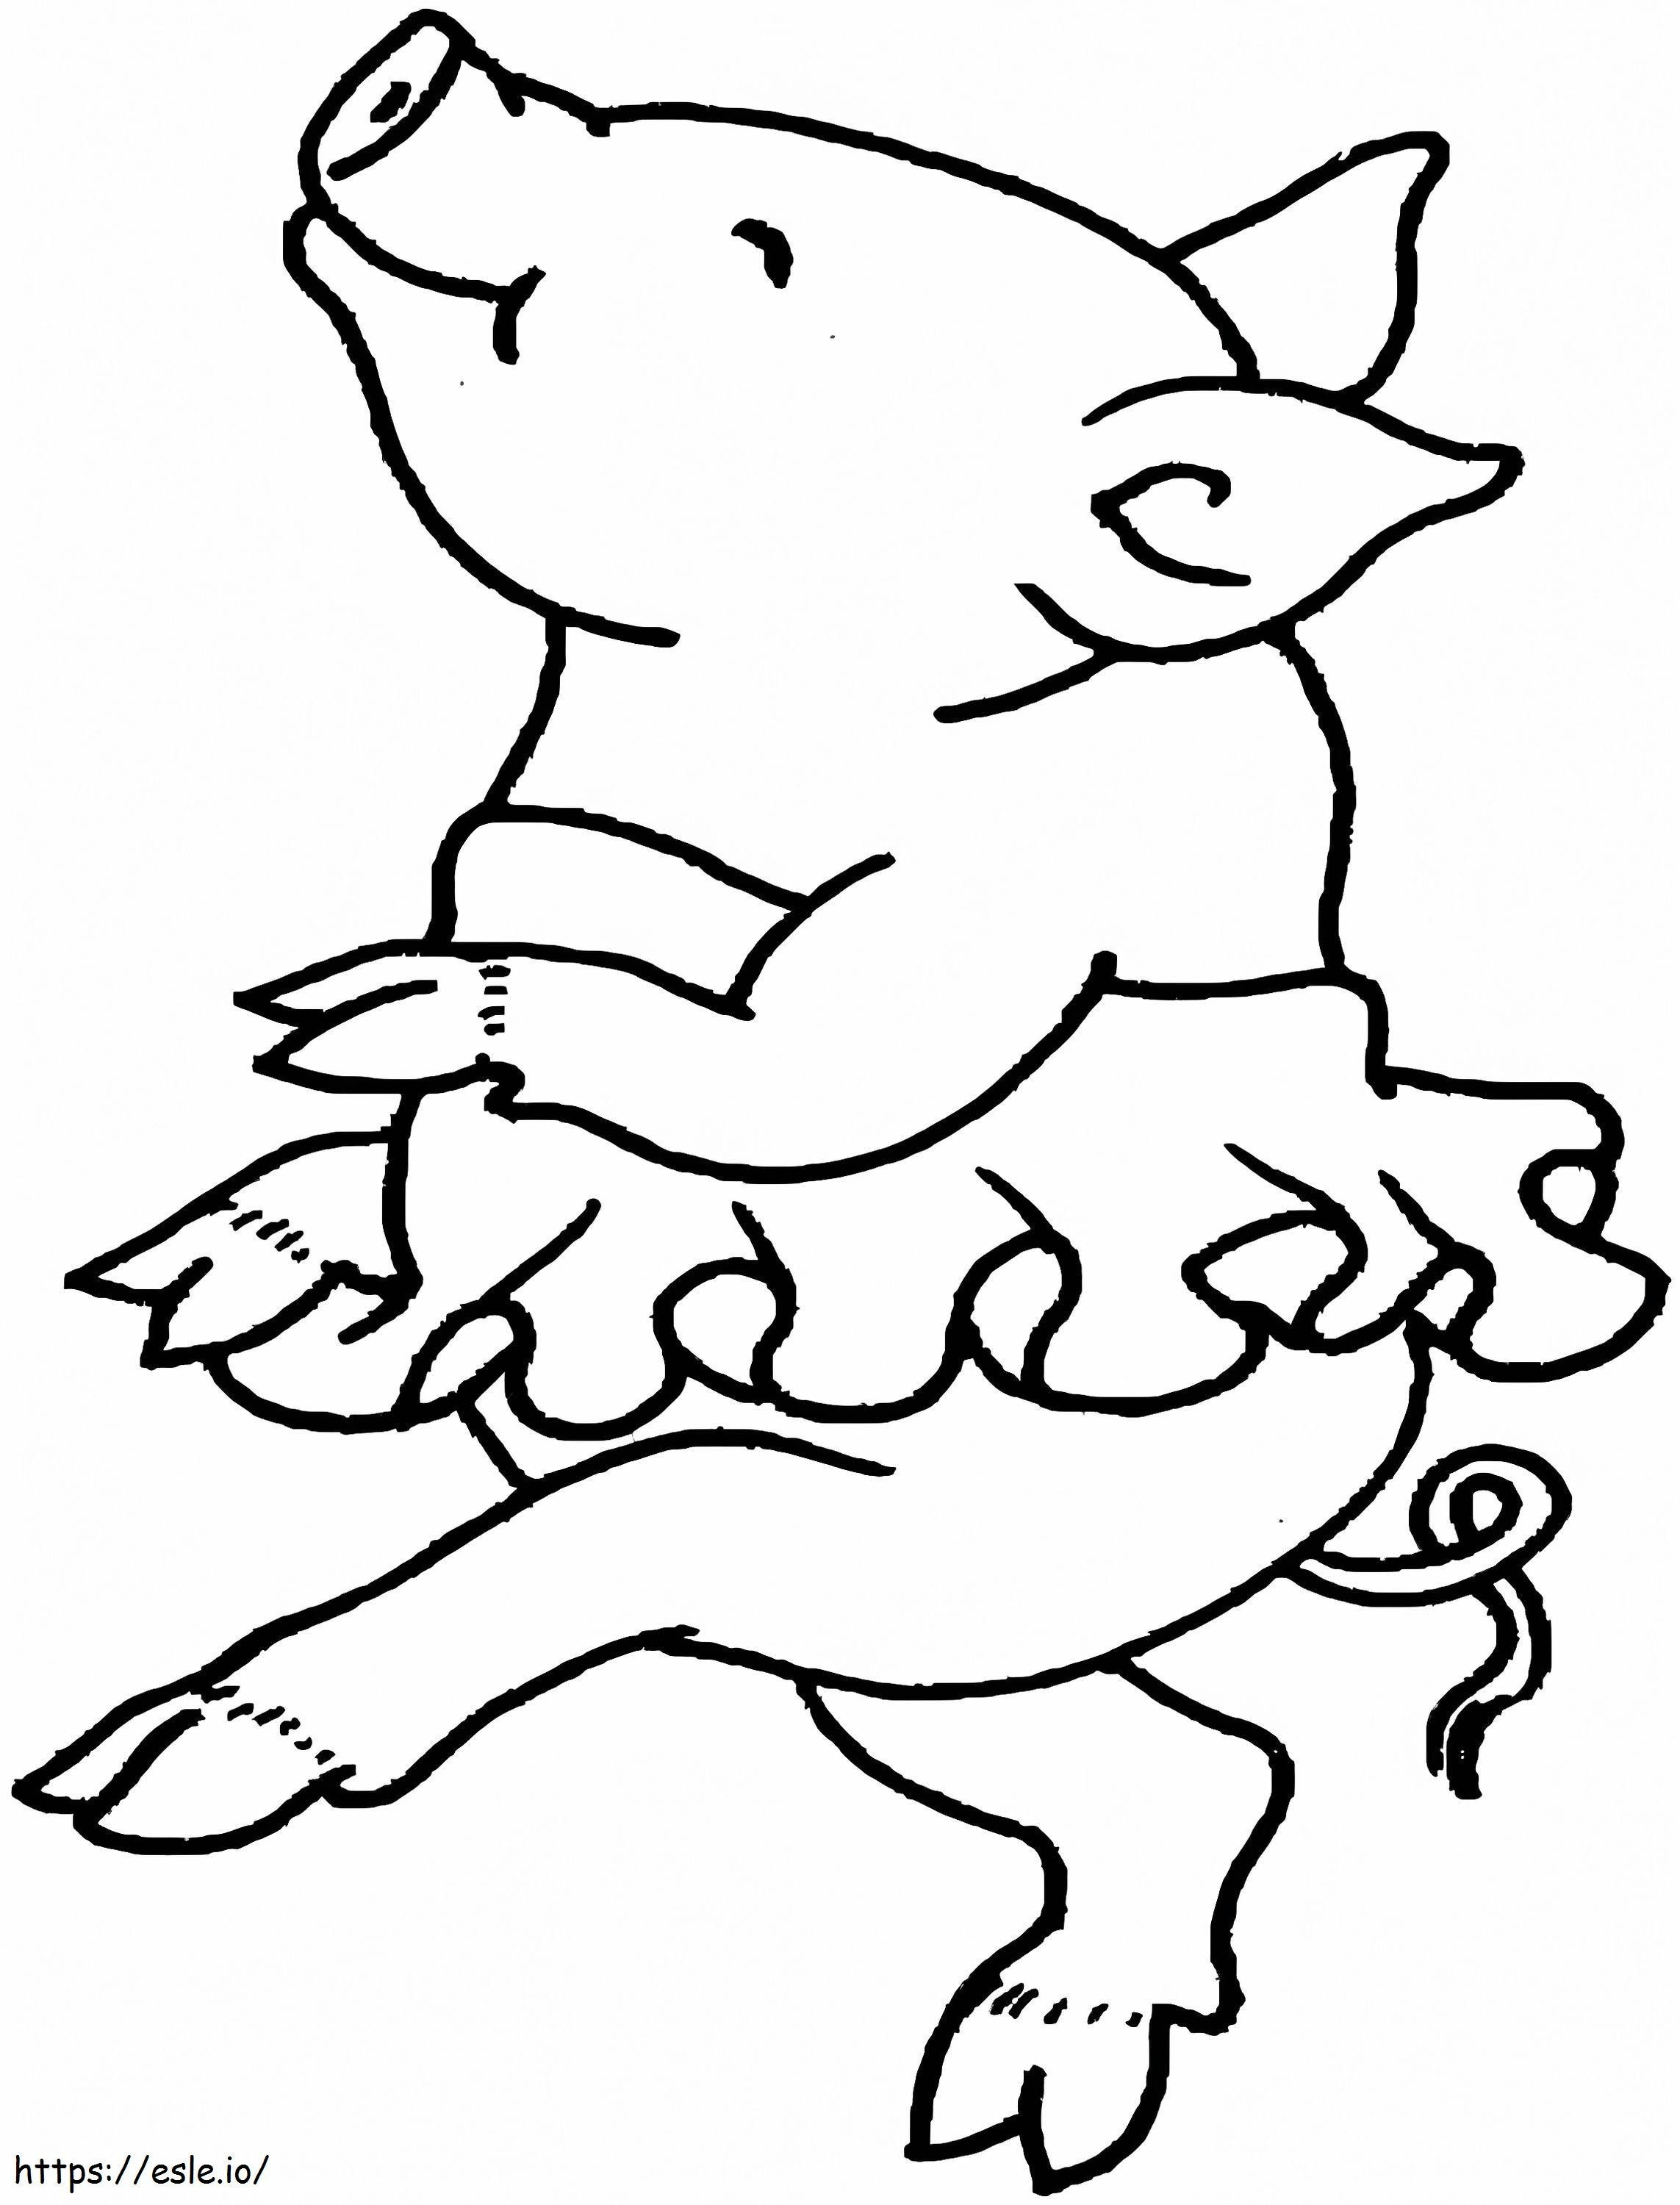 Ballet Pig coloring page